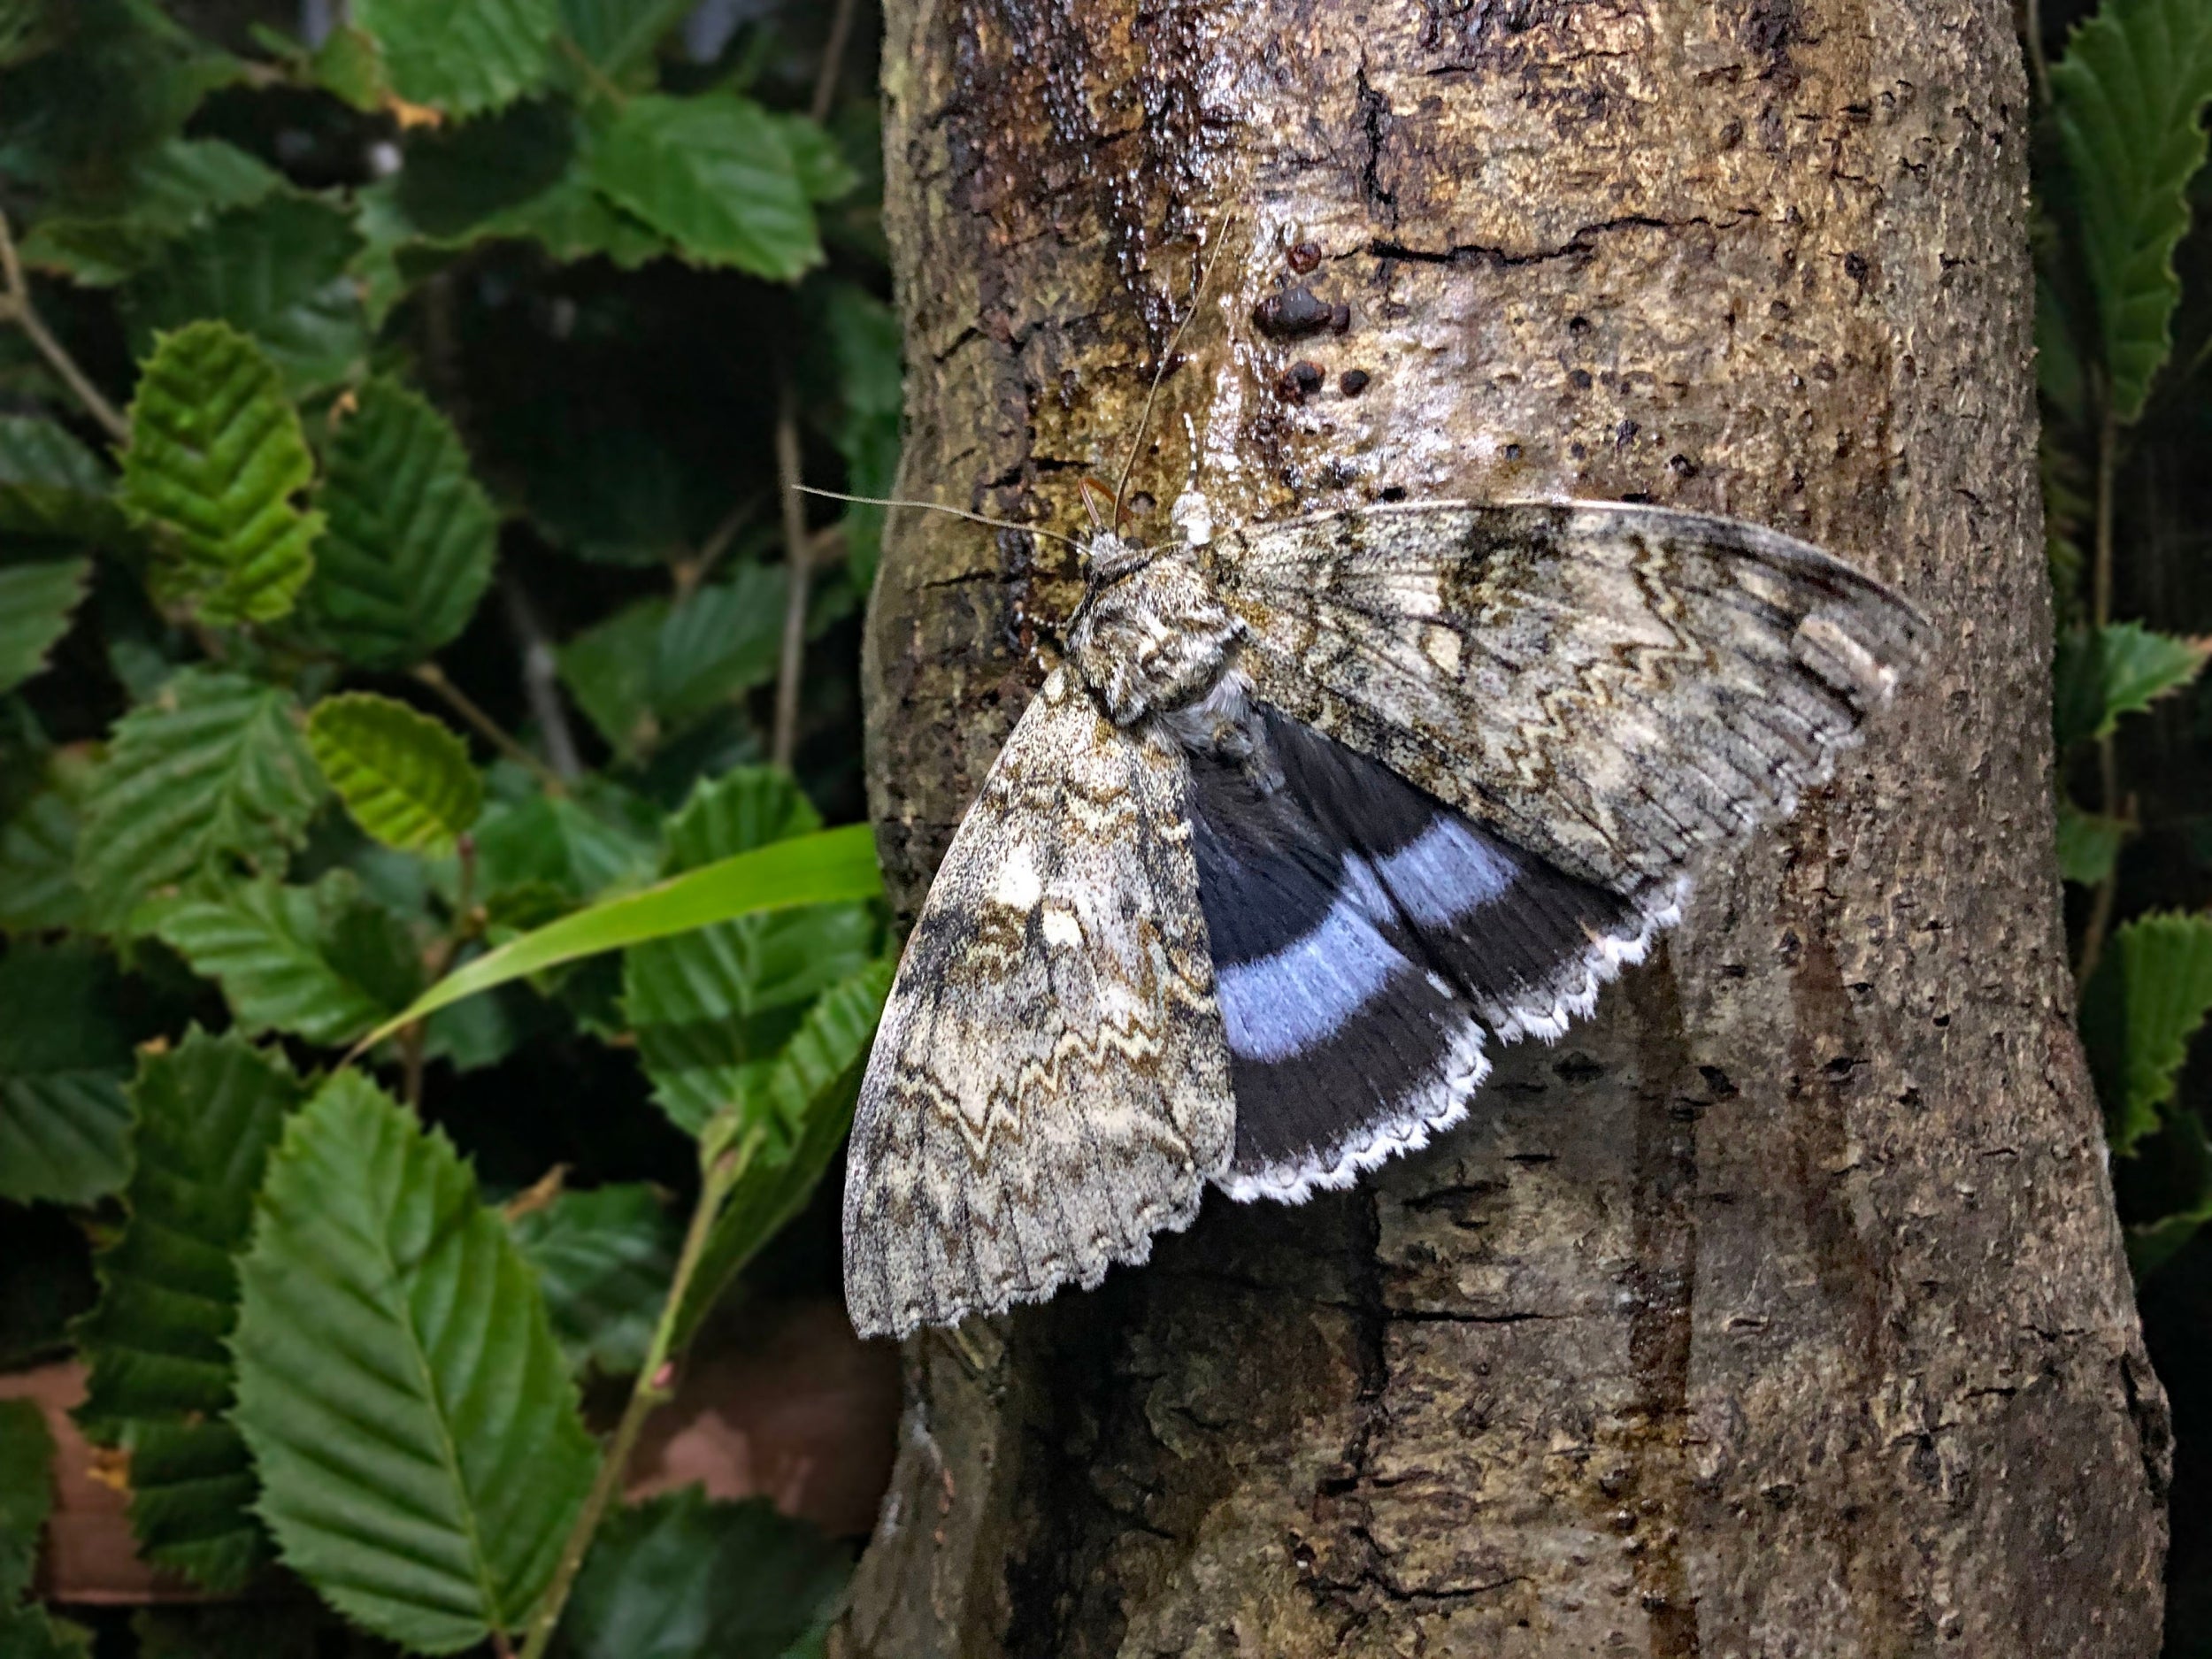 The Clifden Nonpareil, whose name means 'beyond compare', is one of the largest and most spectacular moths native to the UK but was believed to have become extinct in the 1960s